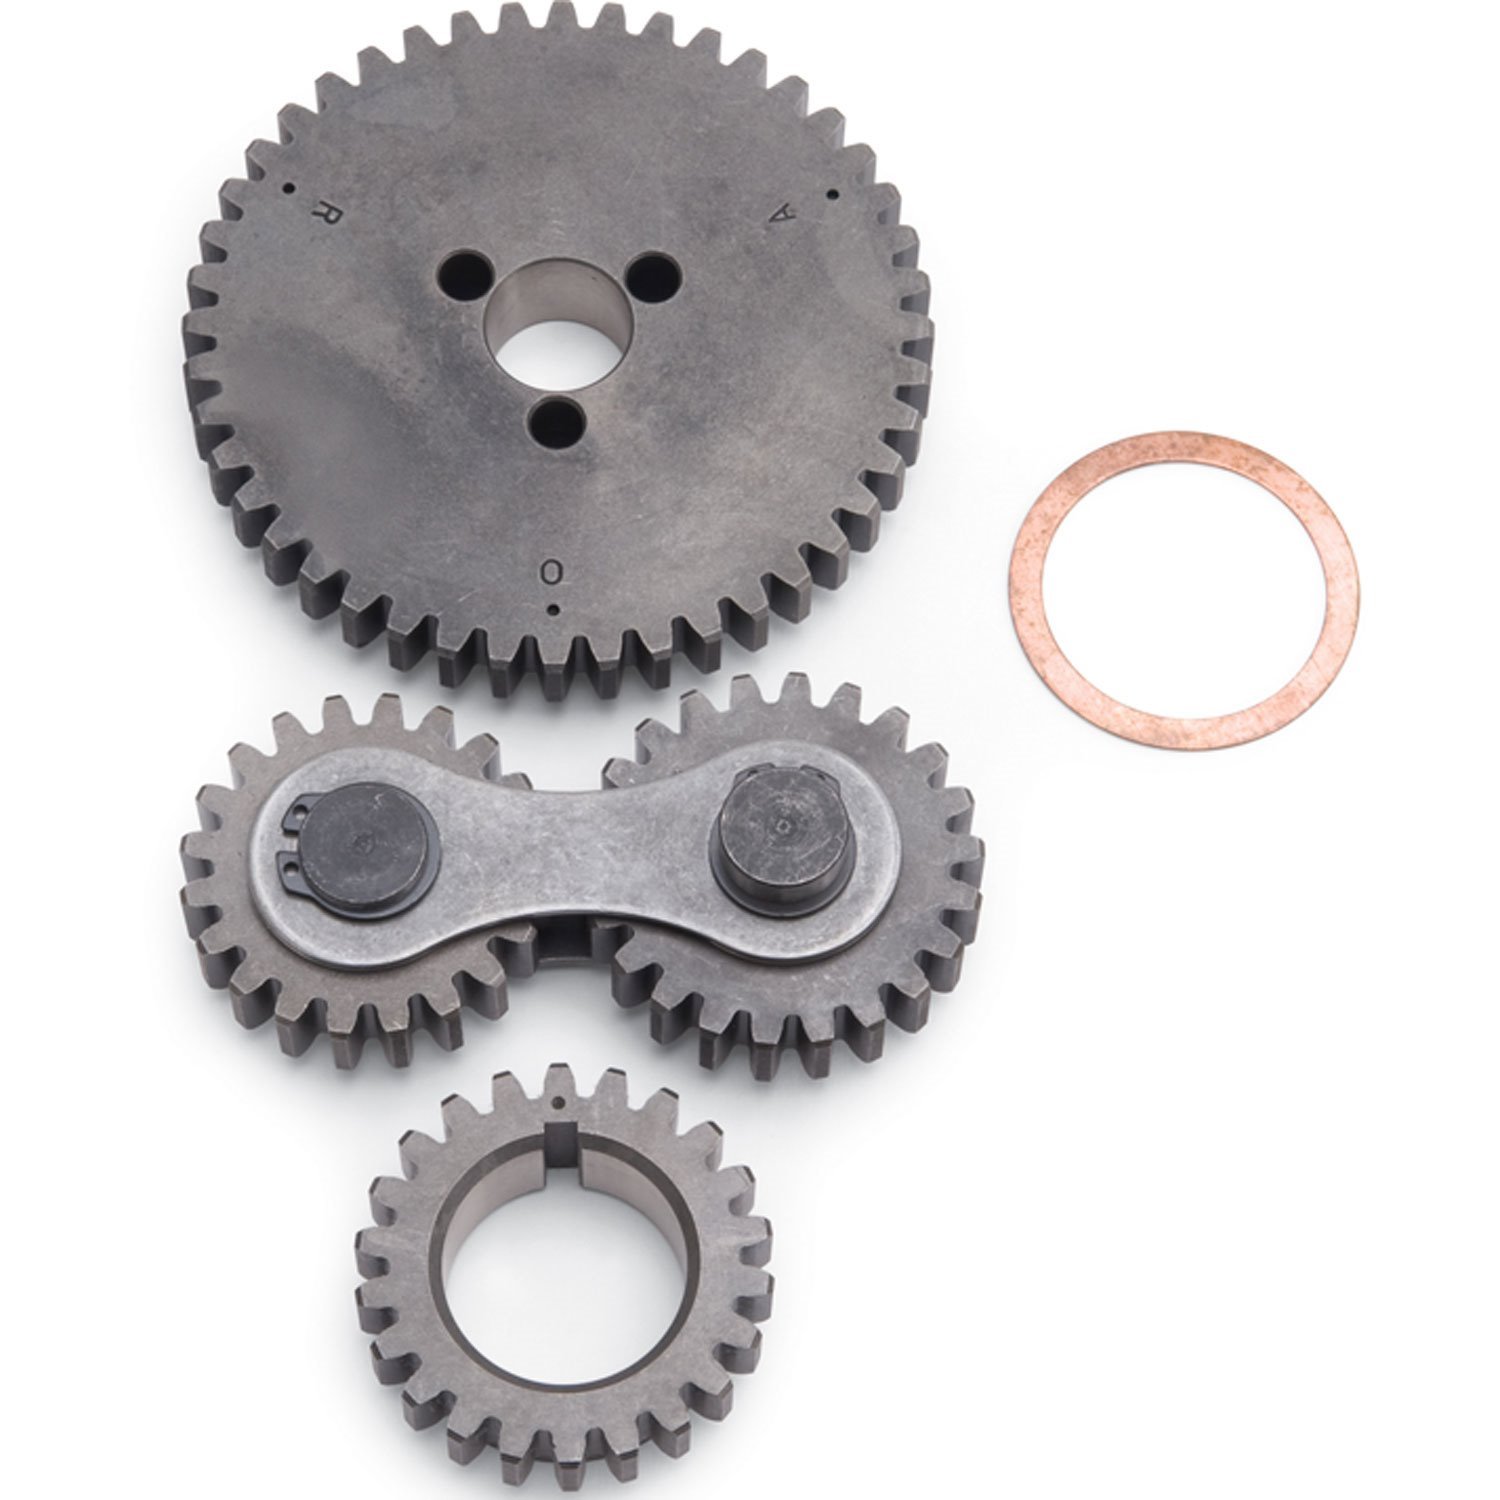 Accu-Drive Camshaft Timing Gear Drive for Small Block